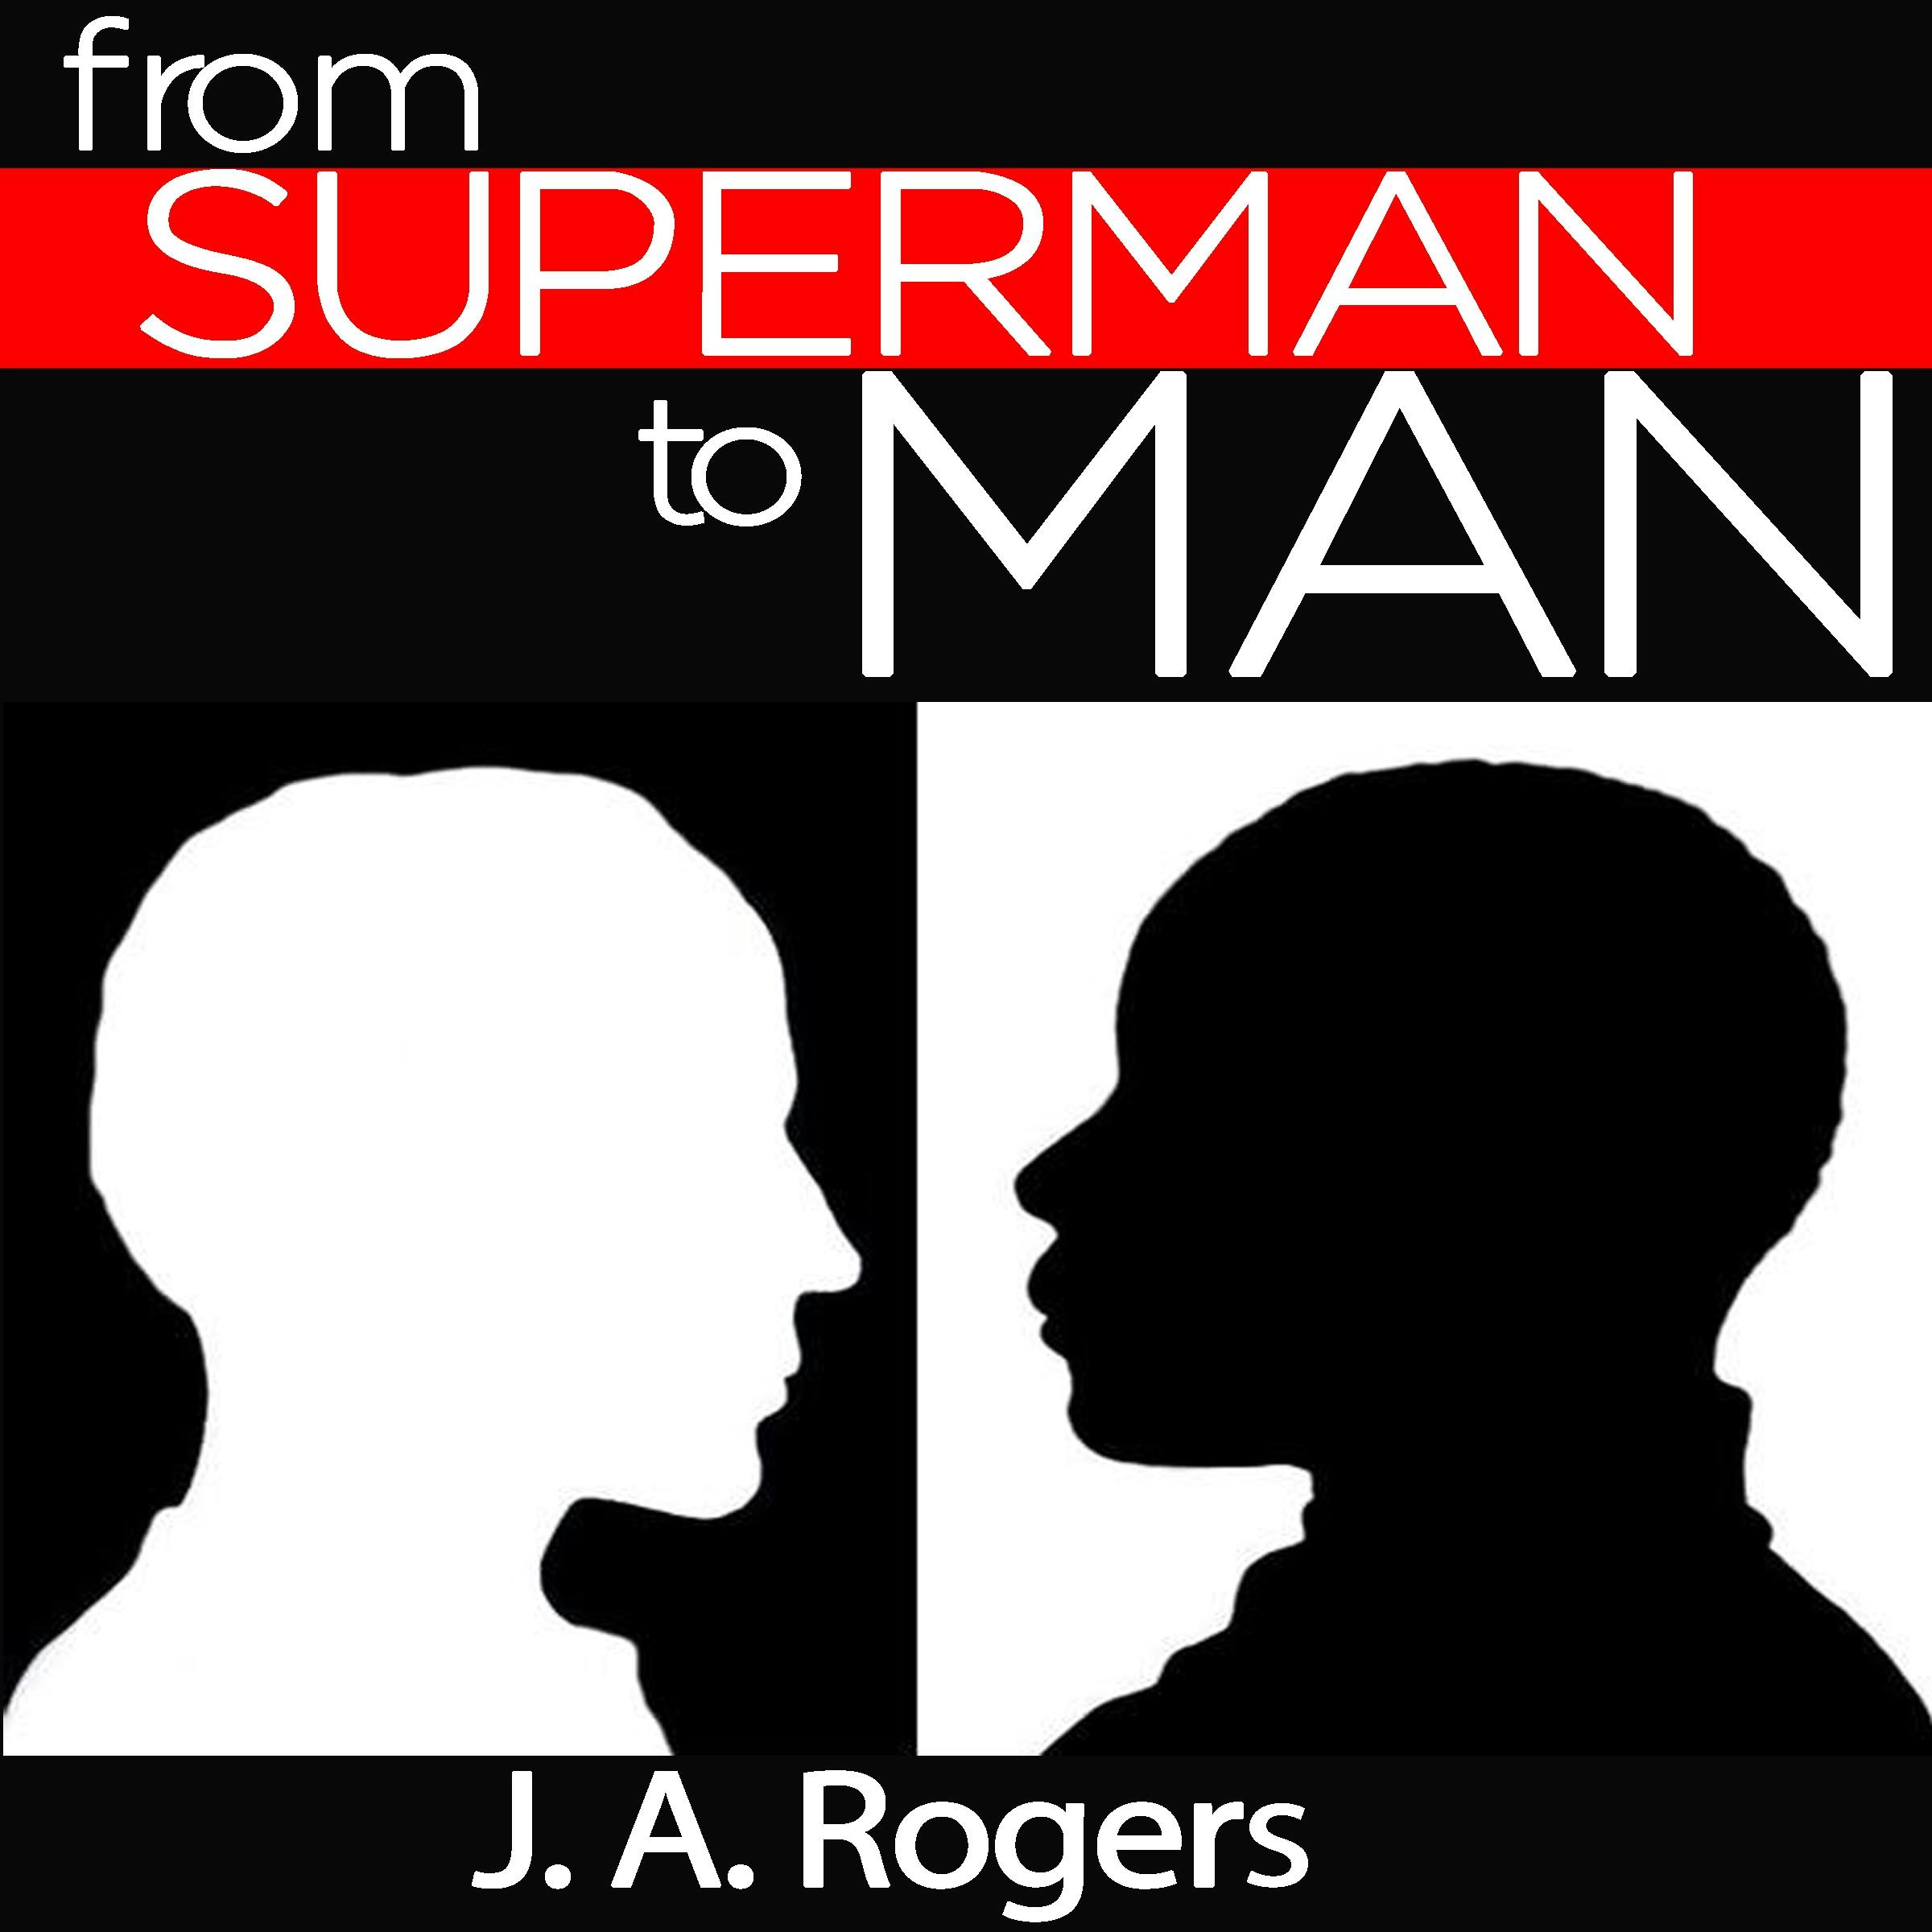 From Superman to Man - undefined